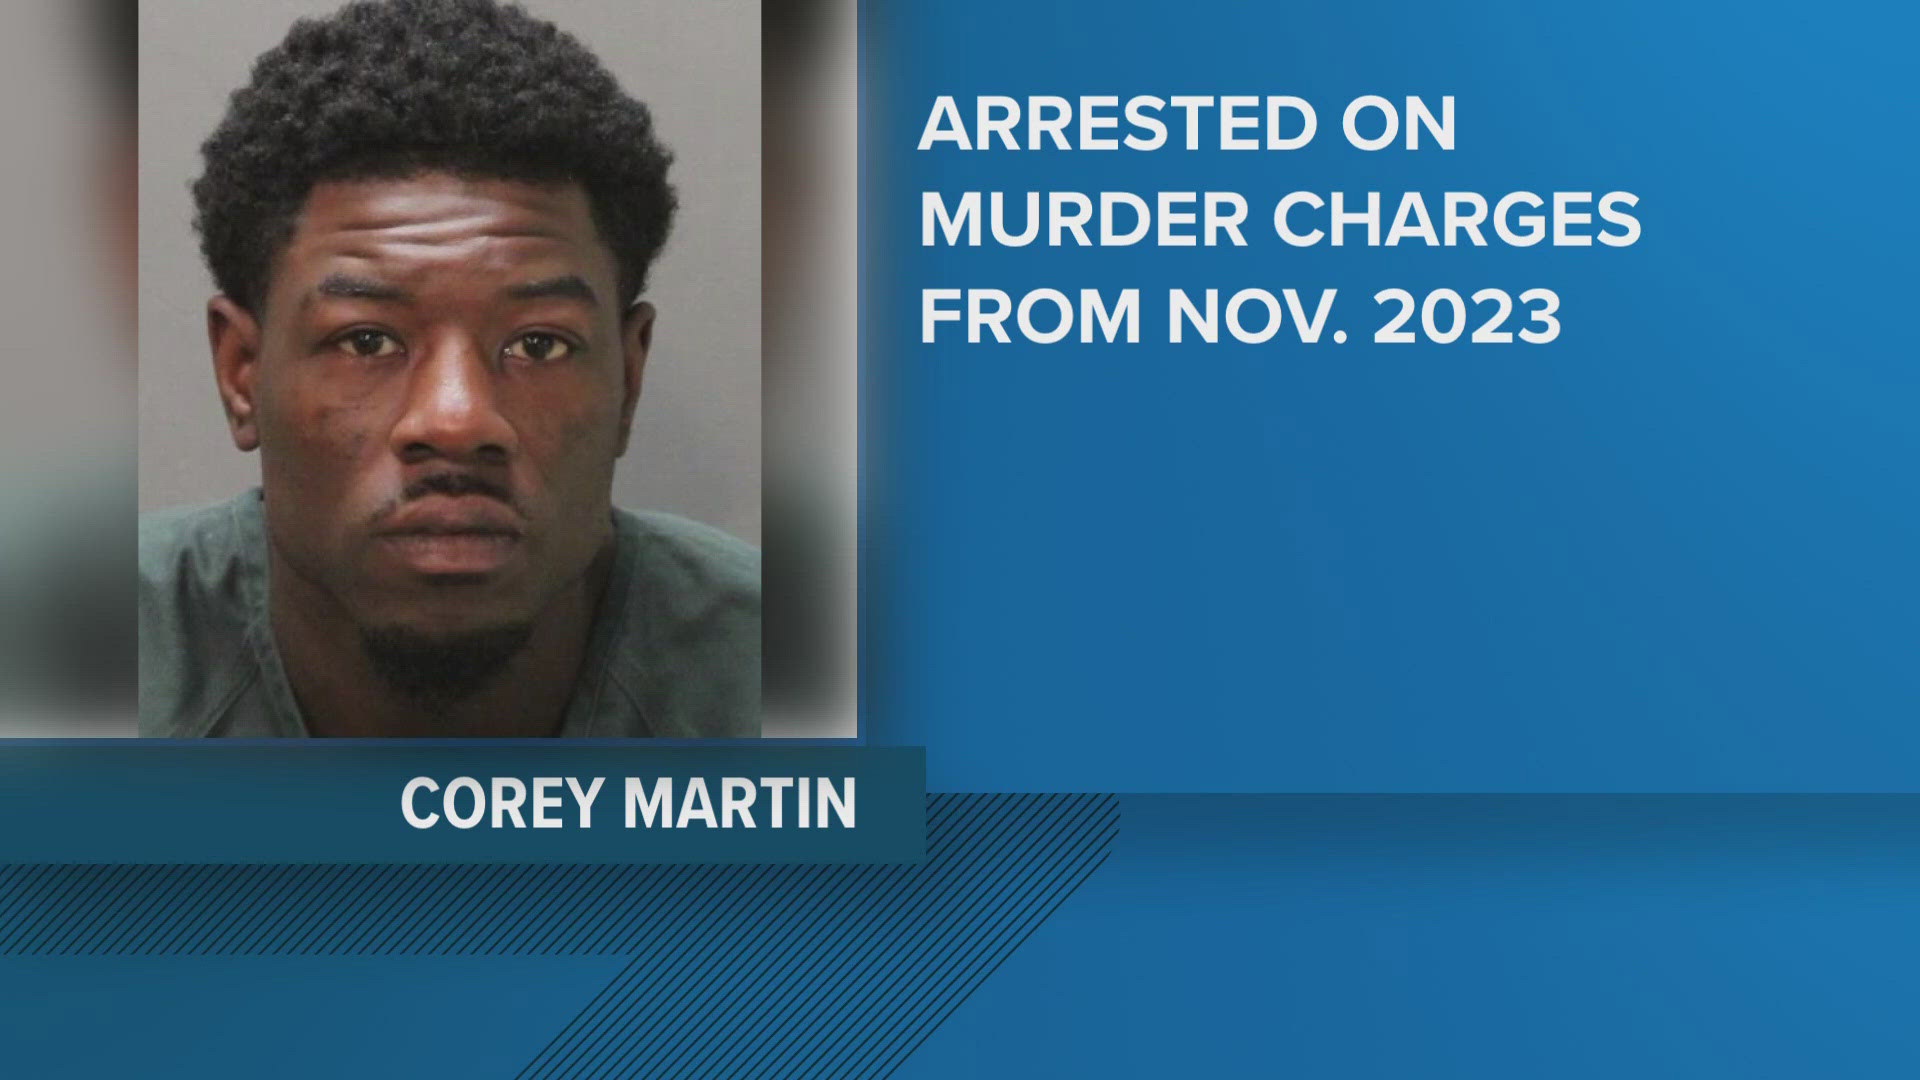 Corey Martin is accused in the murder of Veronica Brown, who was found dead in November 2023.